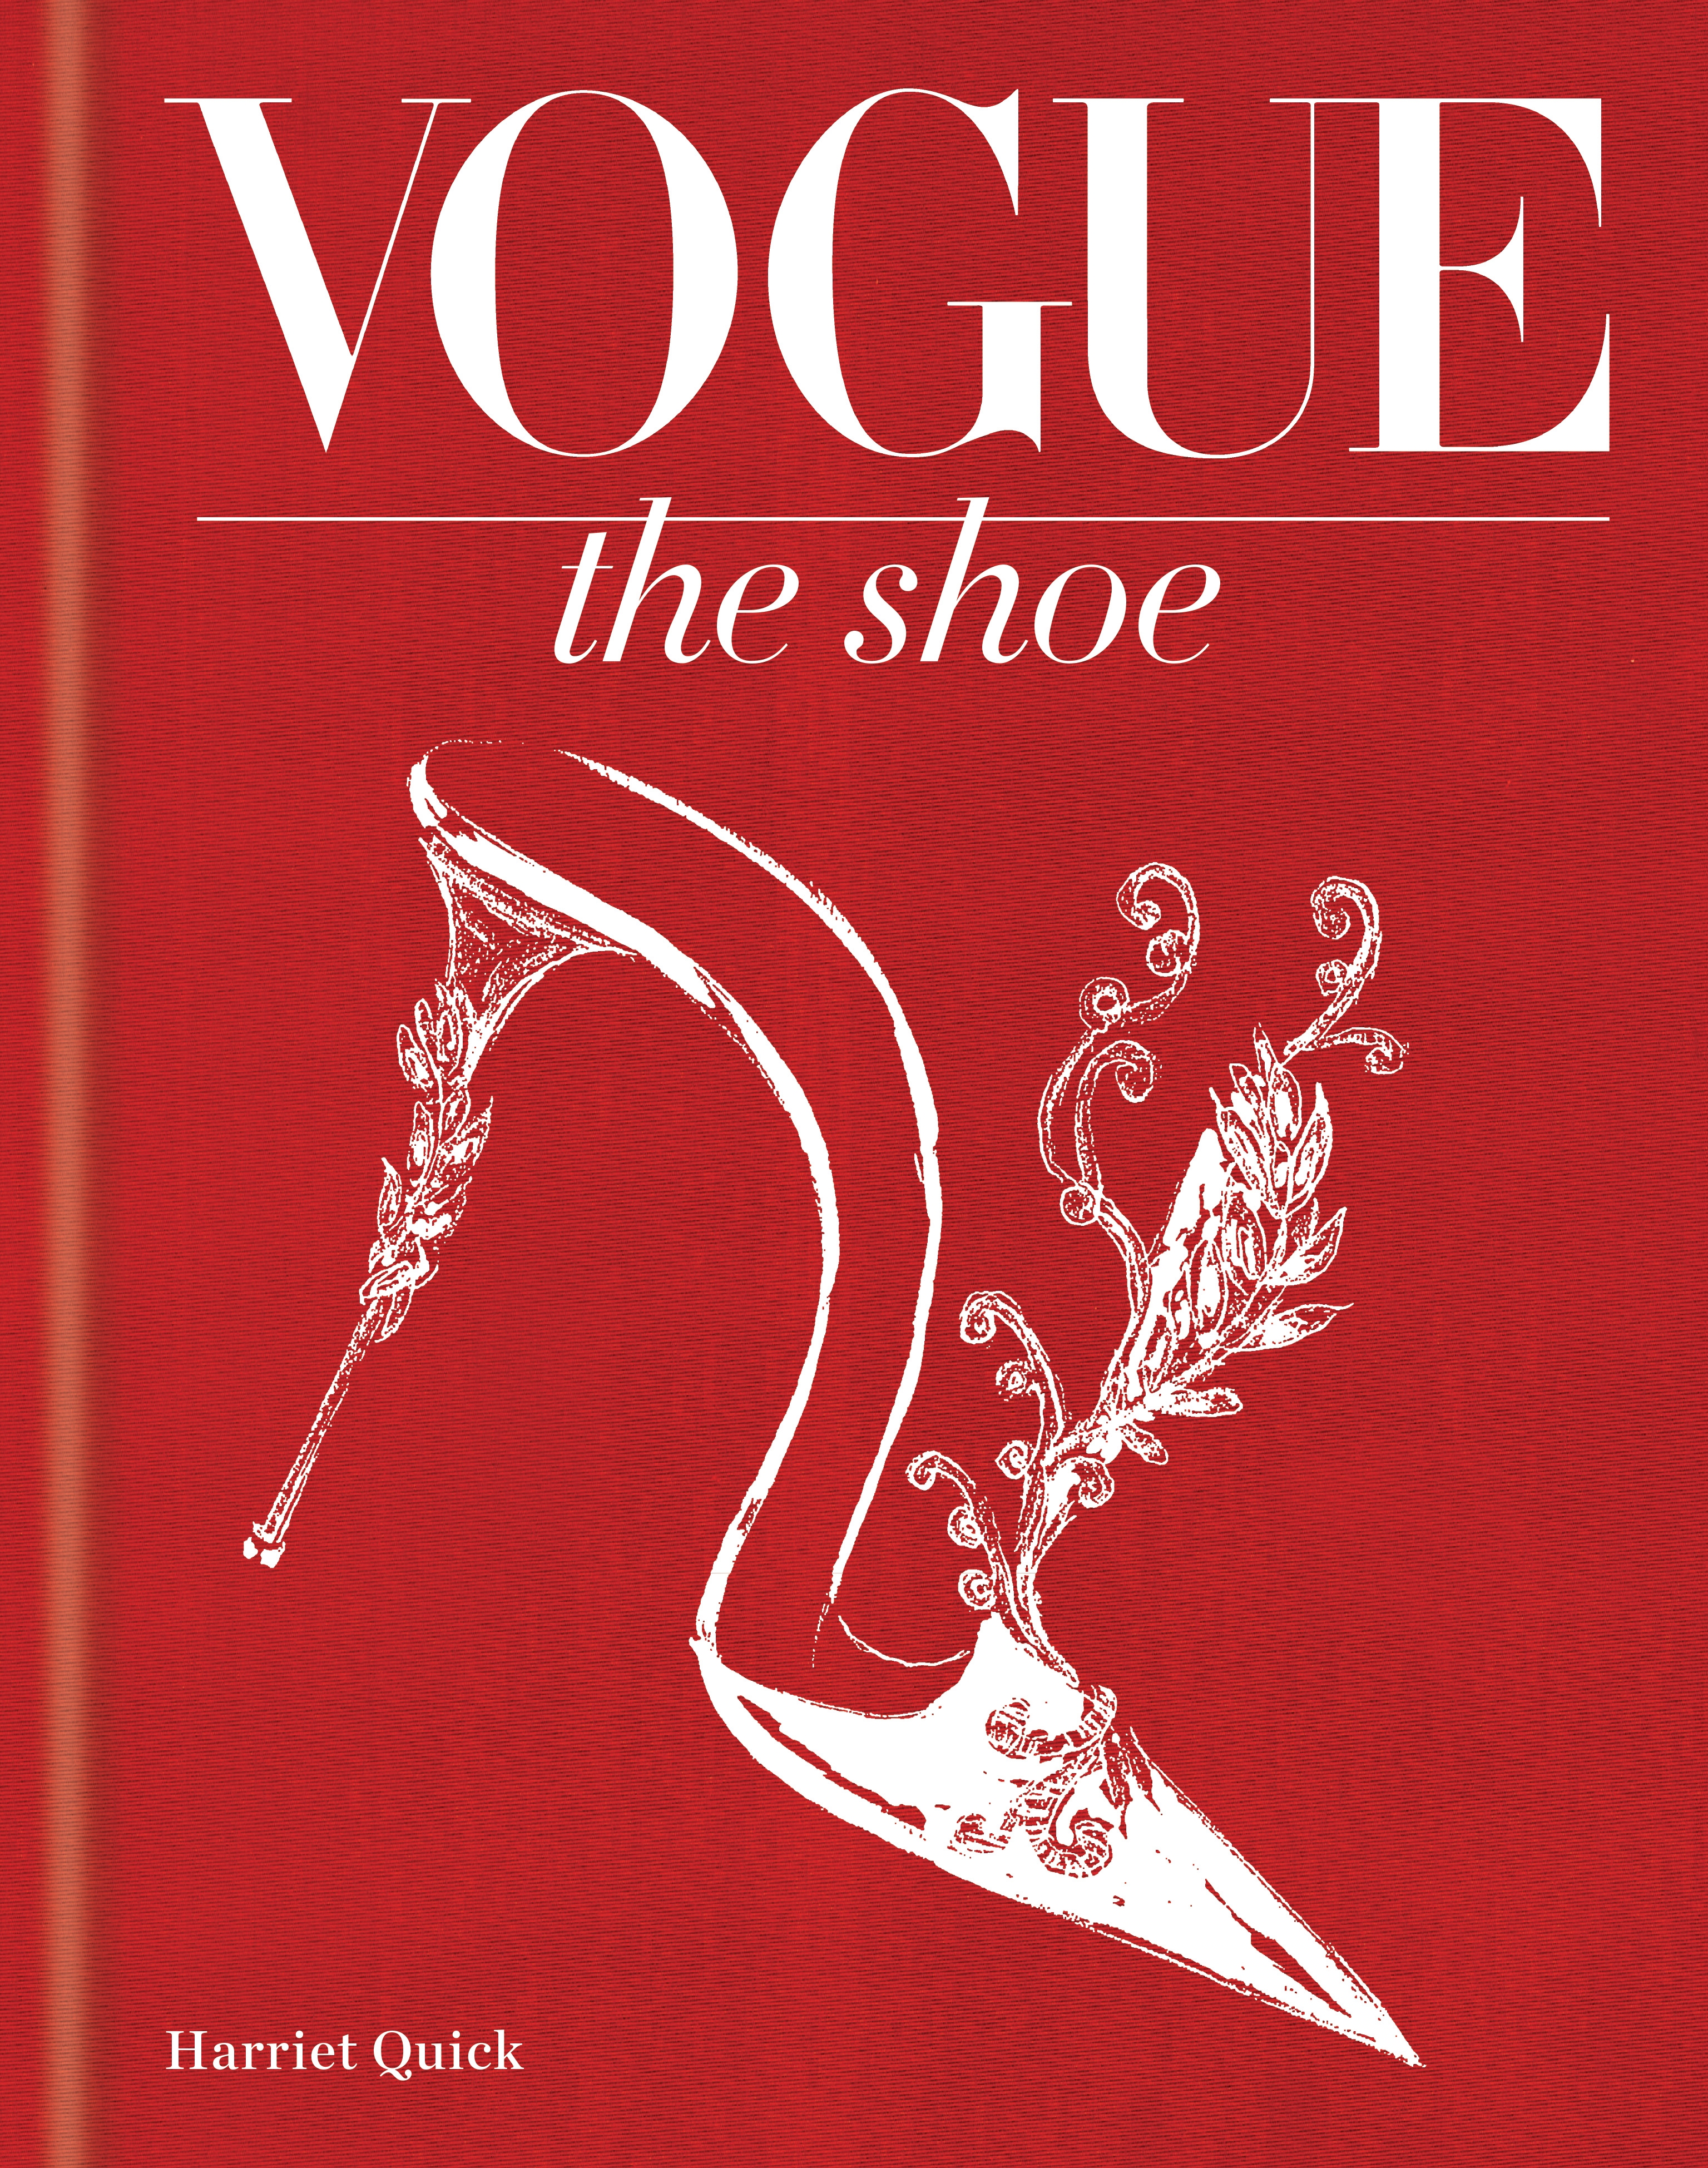 Vogue The Shoe by Harriet Quick | The home of non-fiction publishing